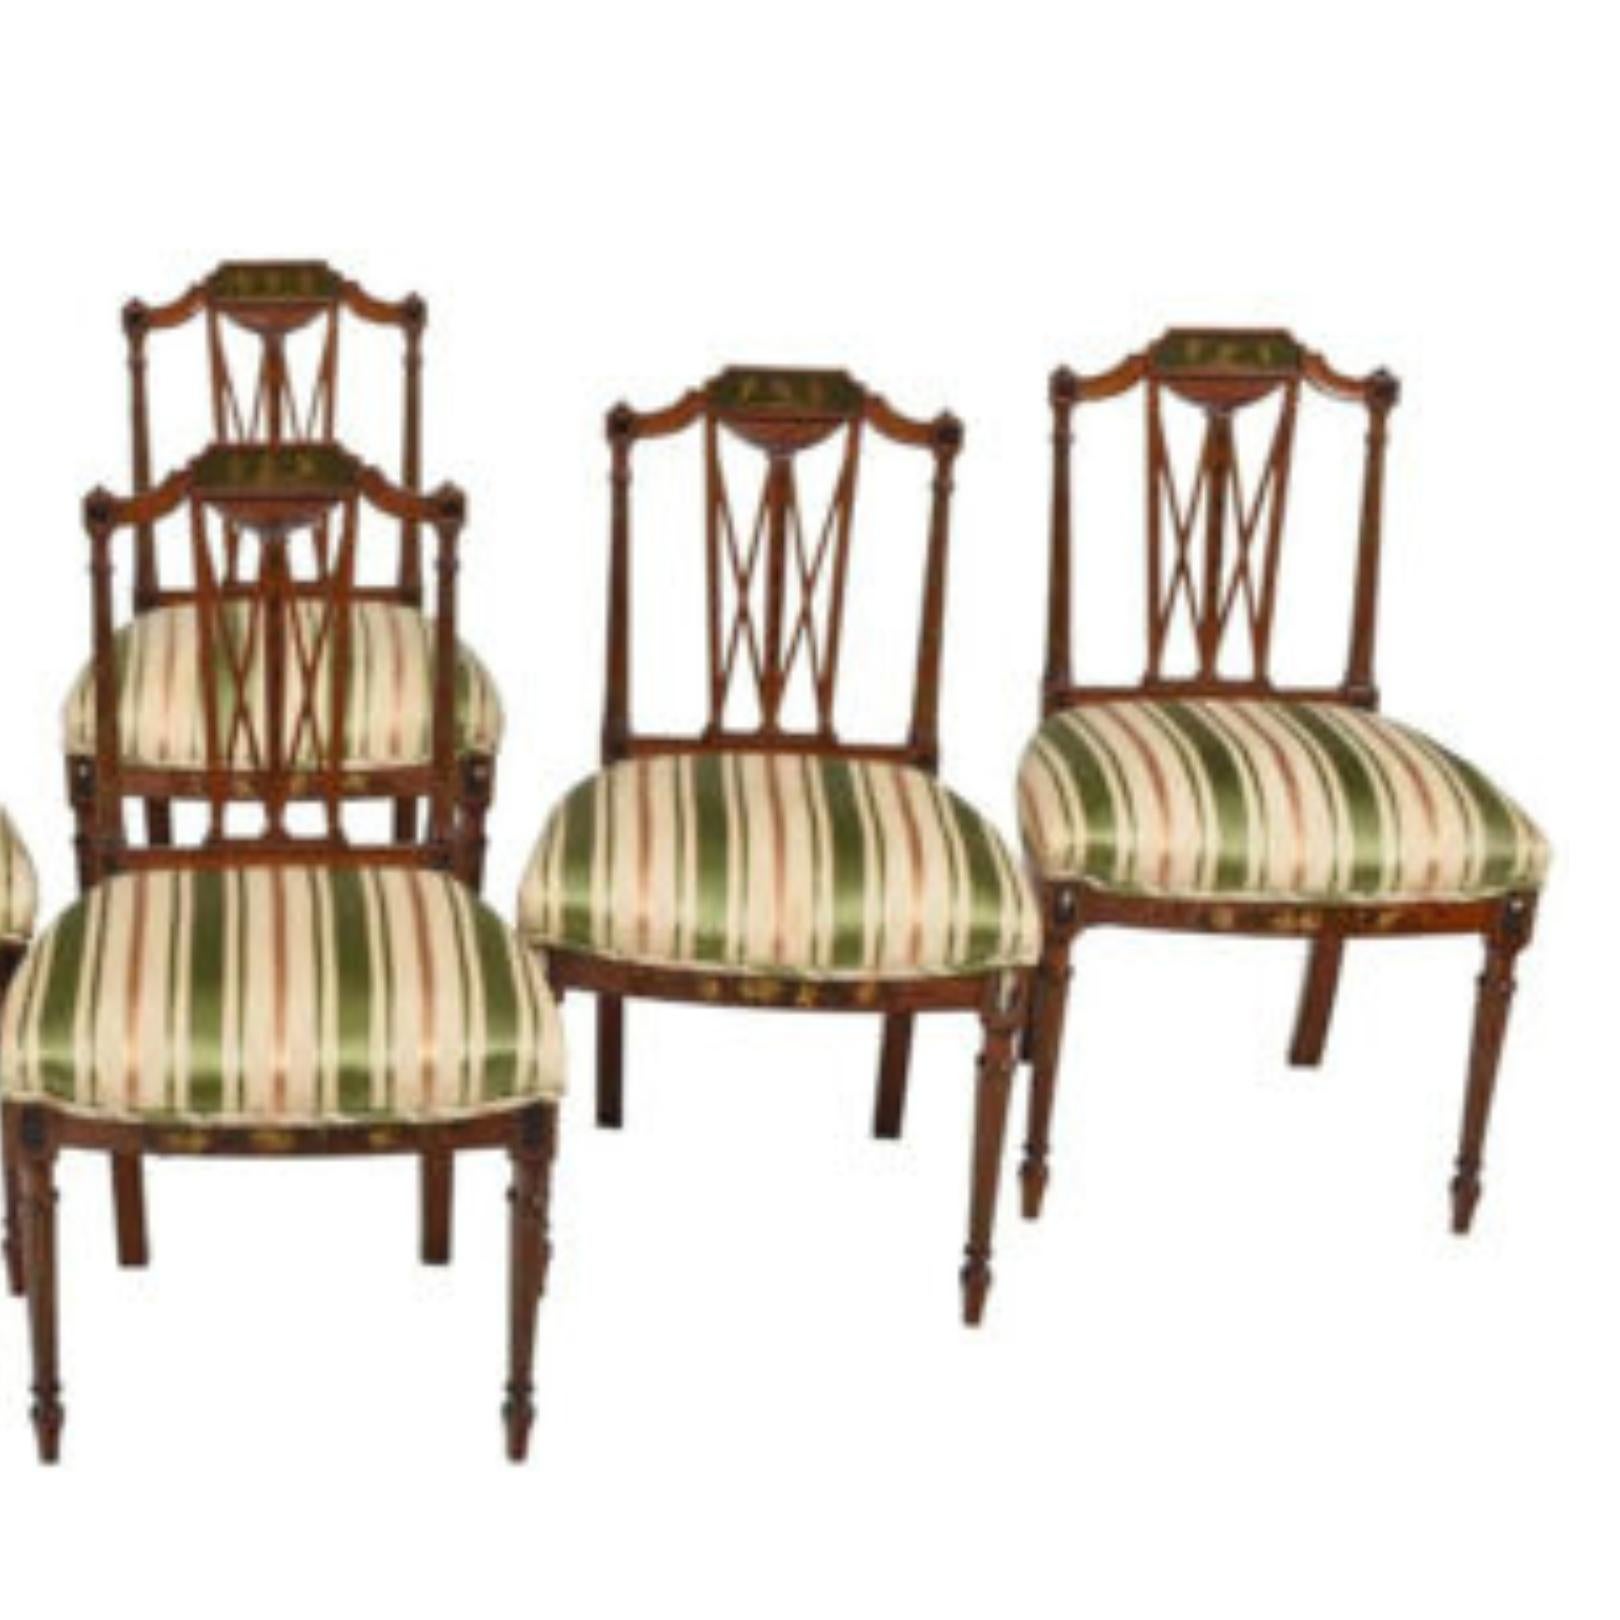 Handsome Set of Early 1900s Antique Silk, Set of 6, Edwardian, Paint Decorated Dining Chairs!!

Antique Chairs, Dining, Silk, Set of Six, Edwardian Paint Decorated, Early 1900s, 20th century!!

Circa 1900, each light wood frame with a painted